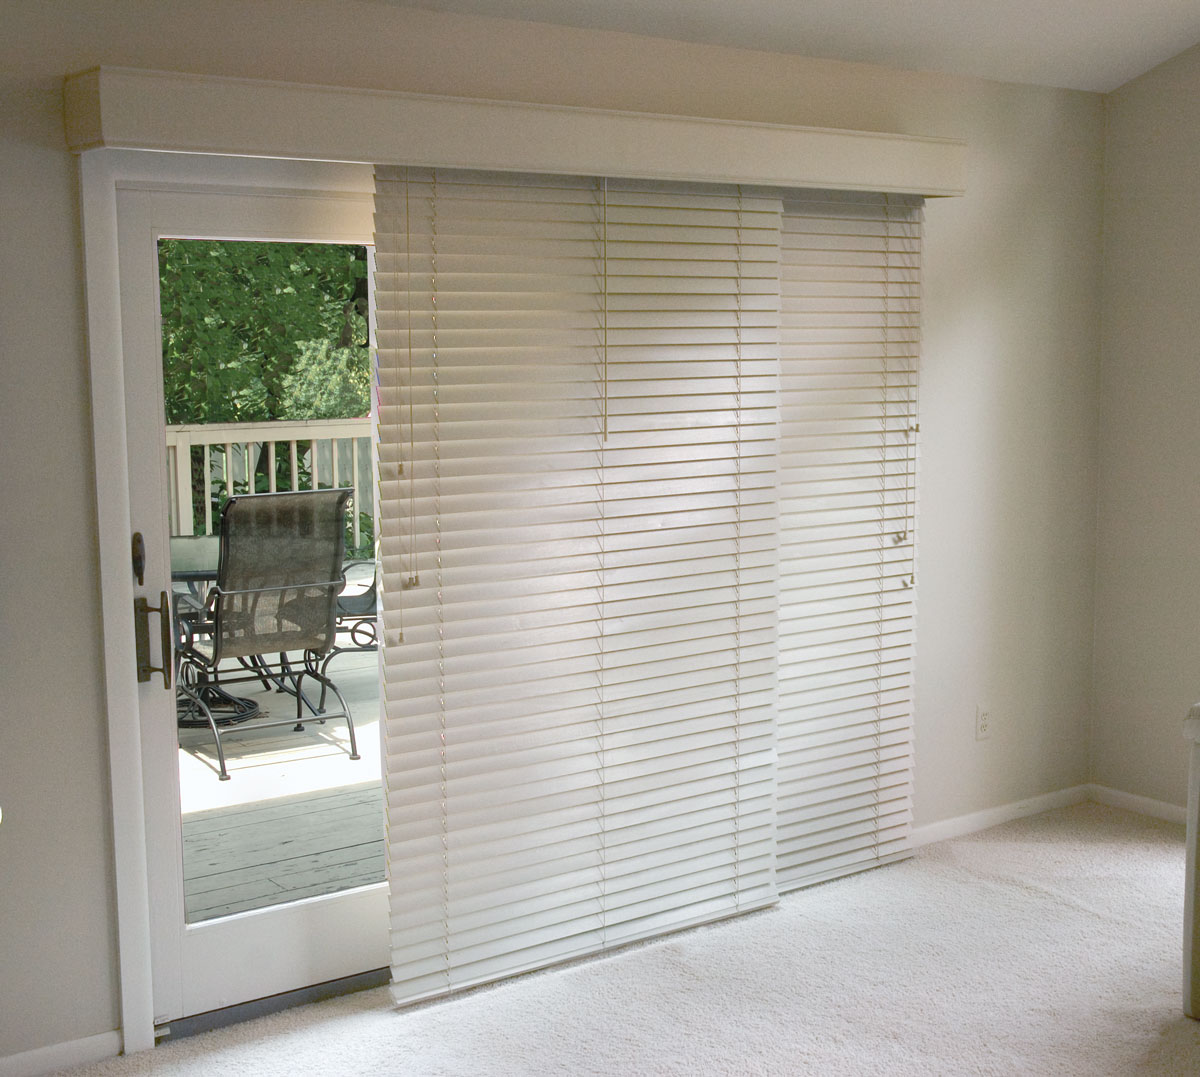 glider blinds horizontal blinds for patio doors SBFQWPZ